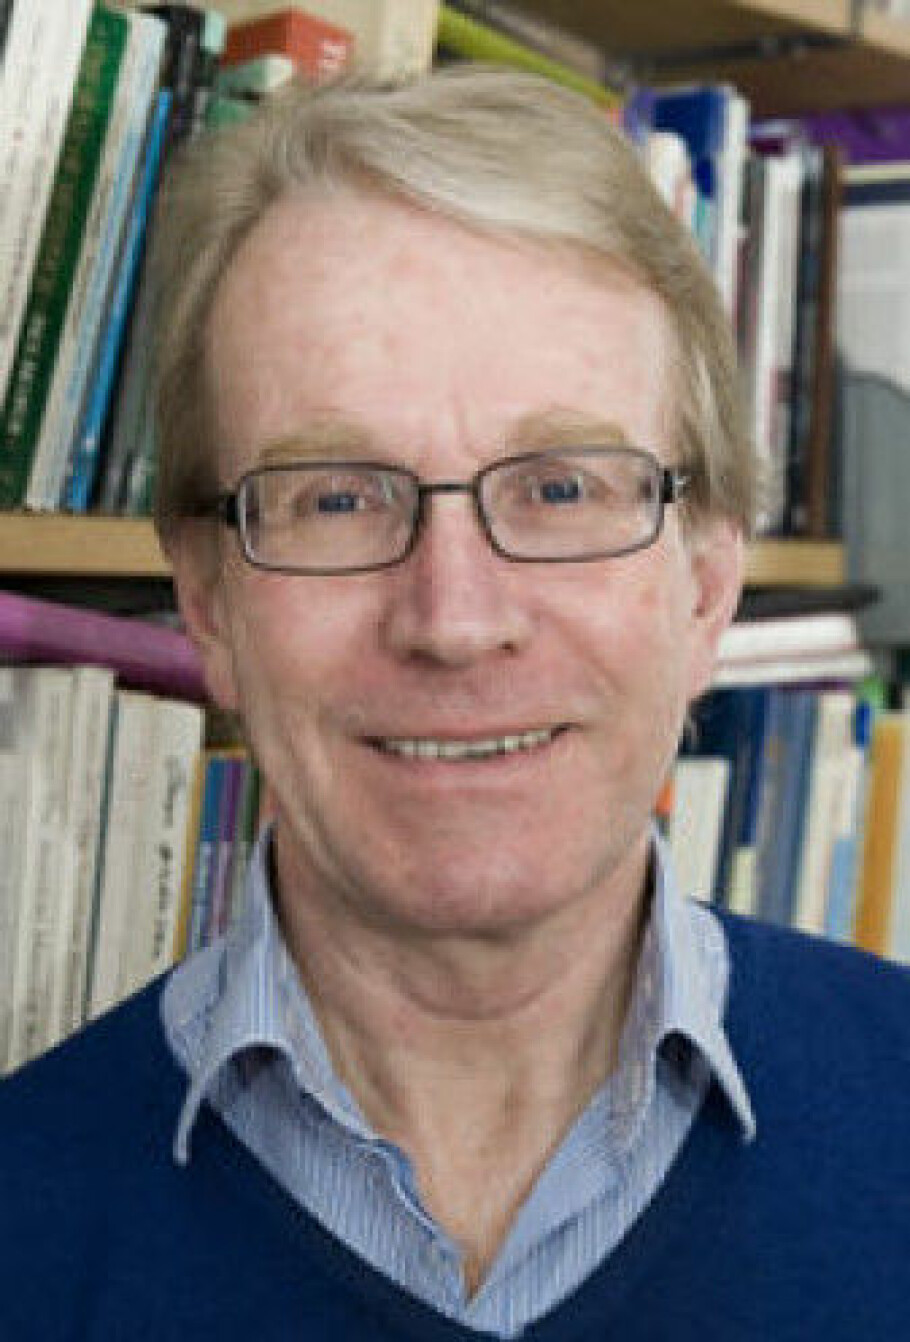 Jan Eivind Myhre is professor emeritus in history at the University of Oslo. He is a specialist on the history of Norway during the 19th century.